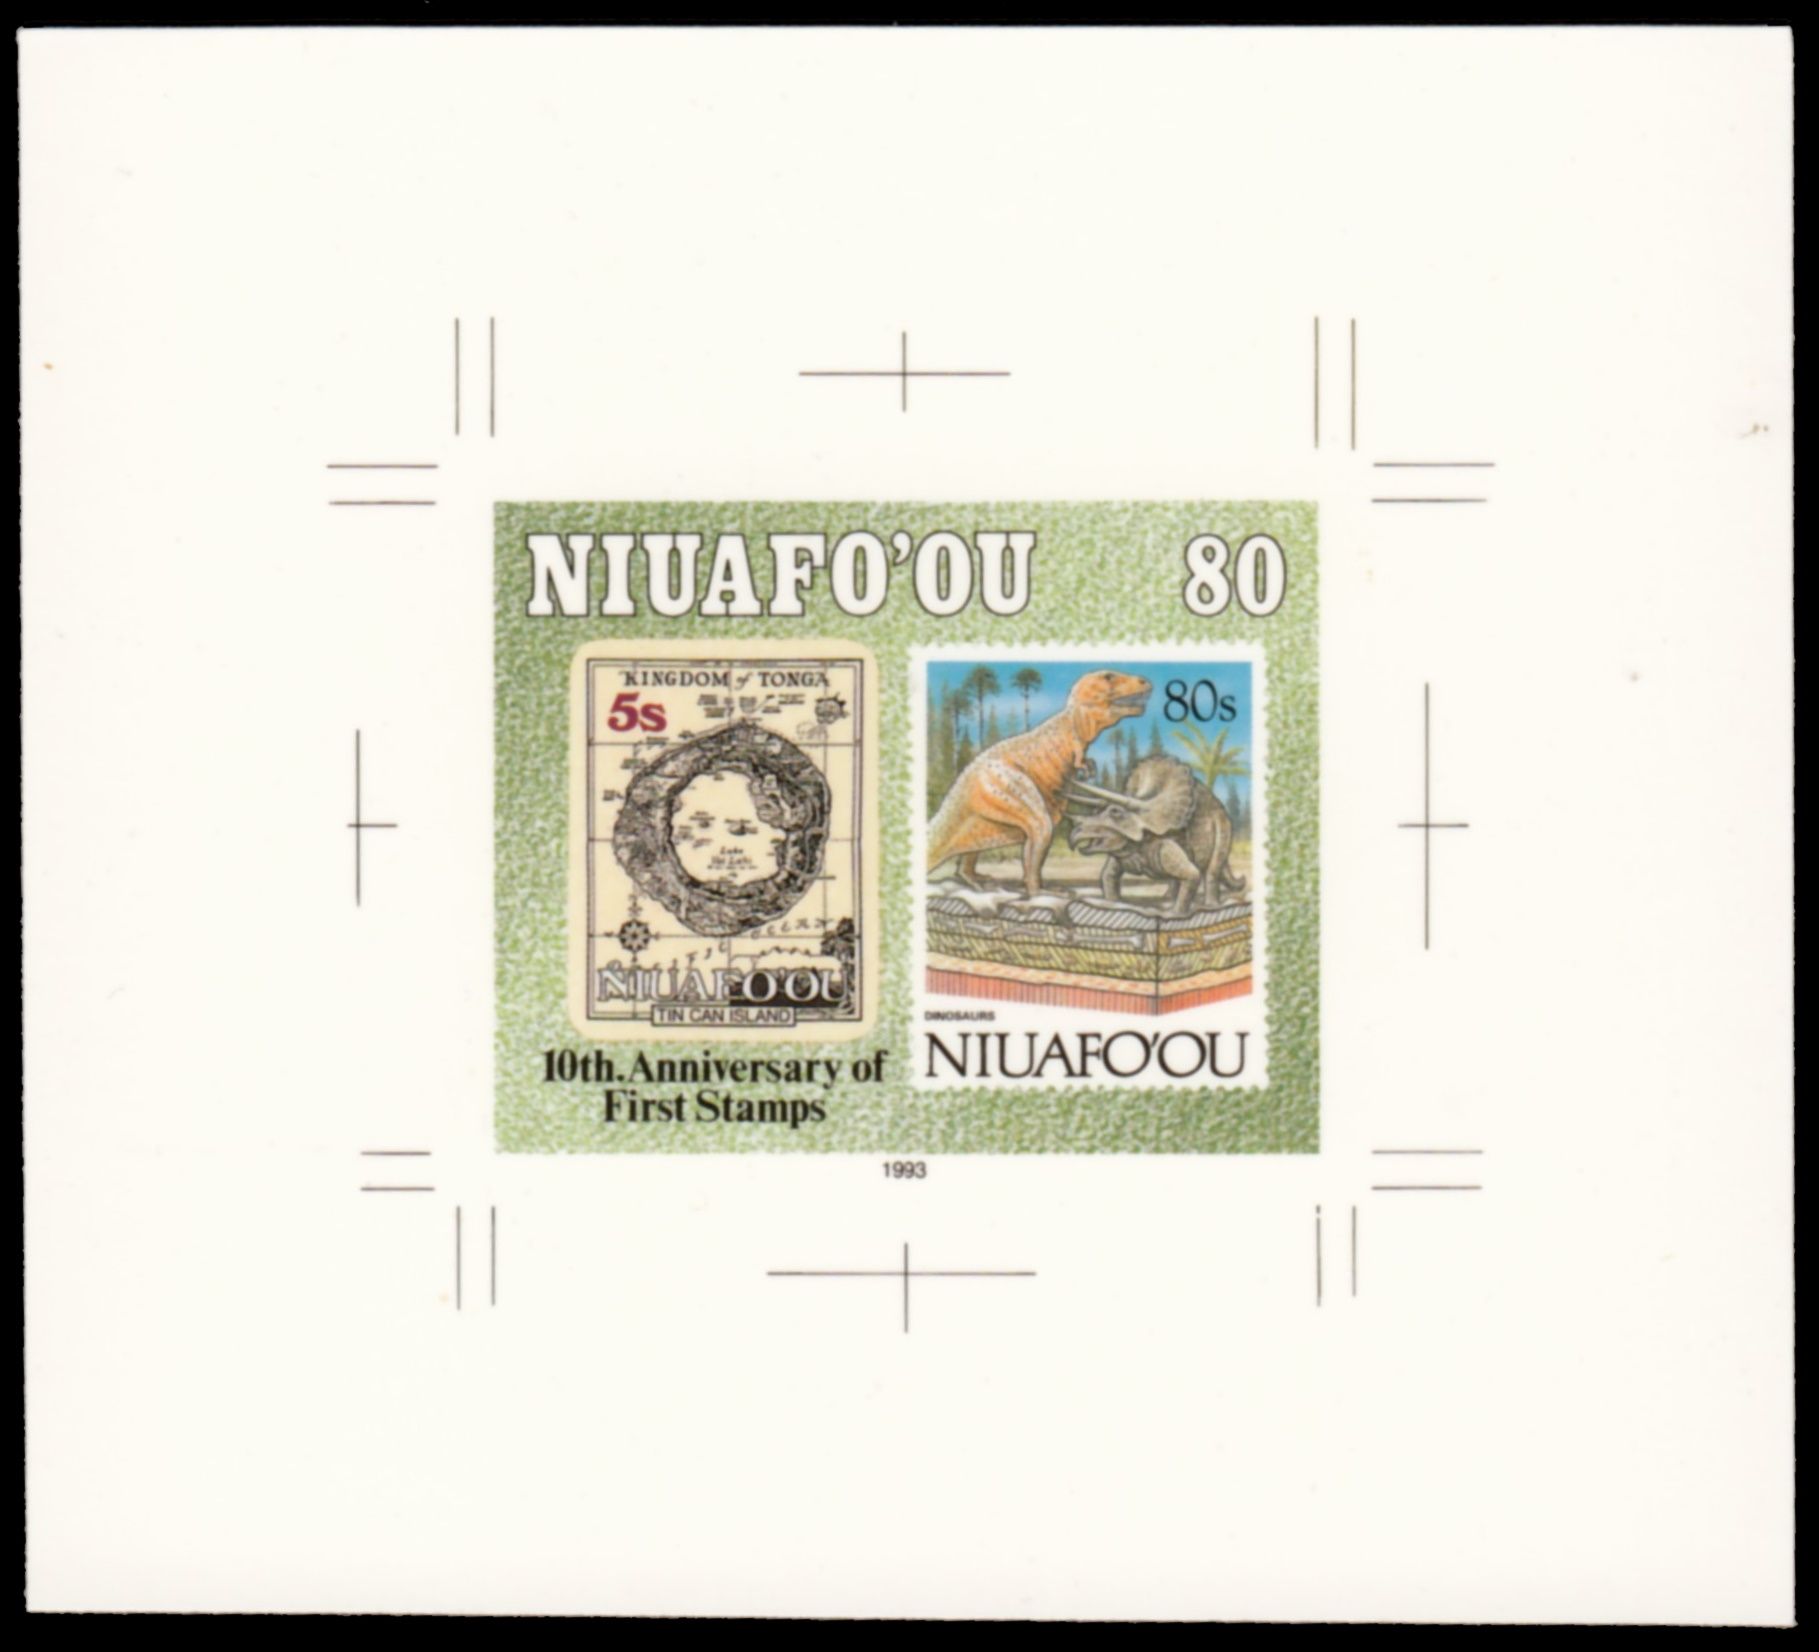 Cromalin proof of Dinosaurs stamp of Niuafo’ou 1993